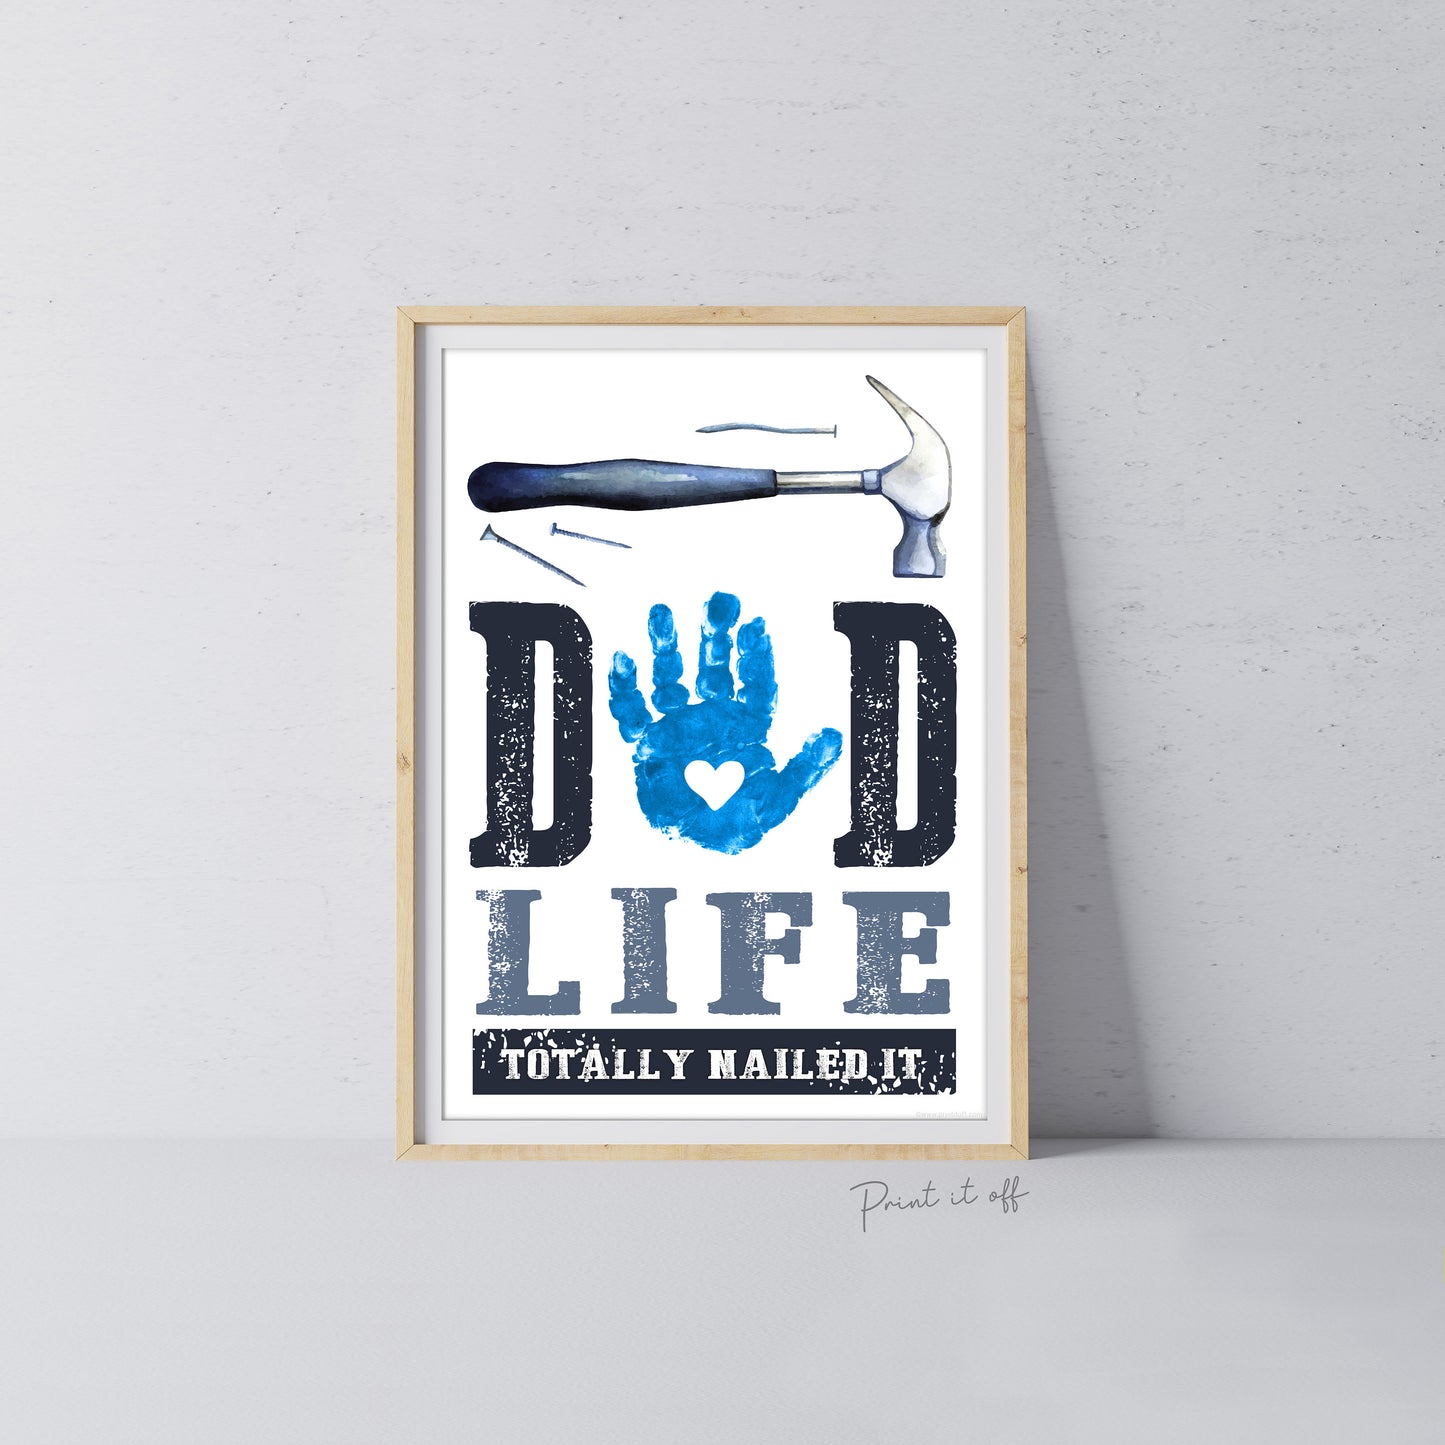 Dad Life You Nailed it Footprint Handprint Art Craft / First Father&#39;s Day / Kids Baby Hand Foot / Activity Gift DIY Card / Print it off 0731